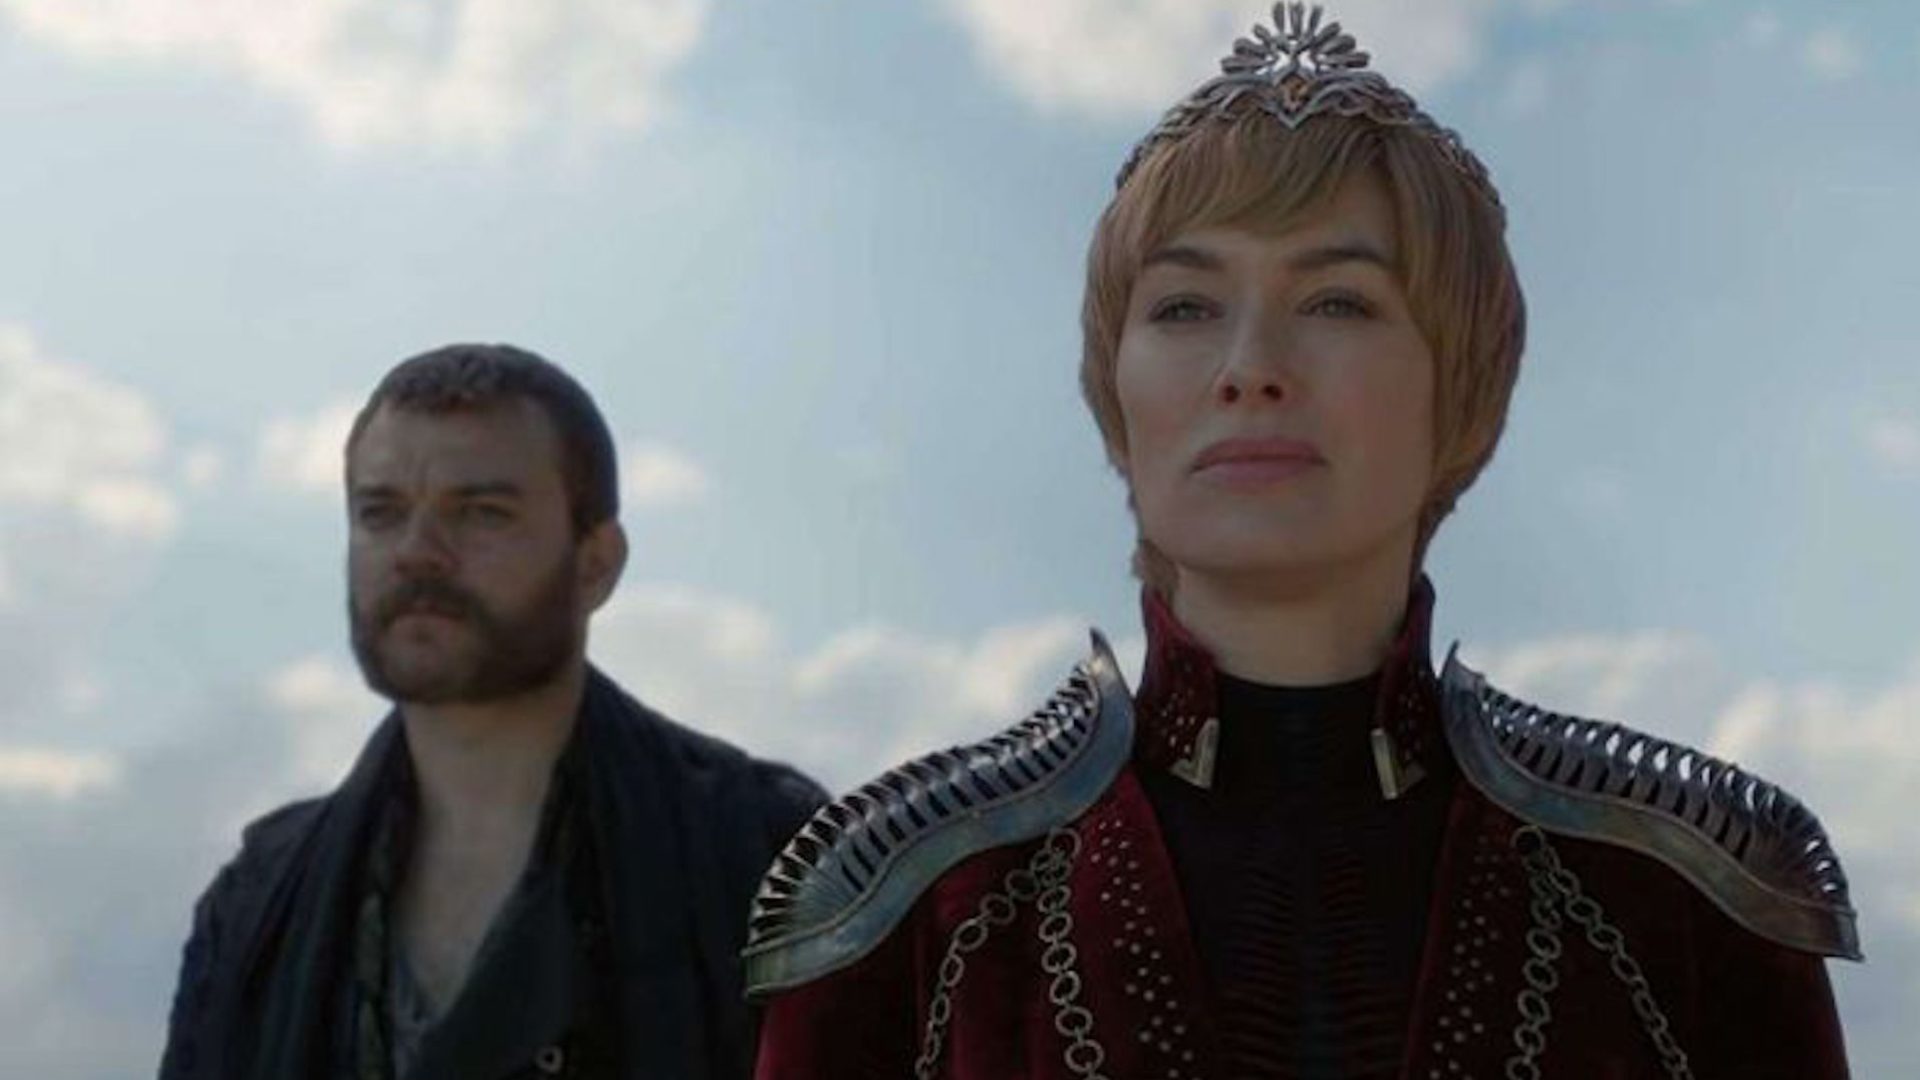 ESSENCE's Game of Thrones Group Chat: Cersei Is Back On Her Same Ole BS